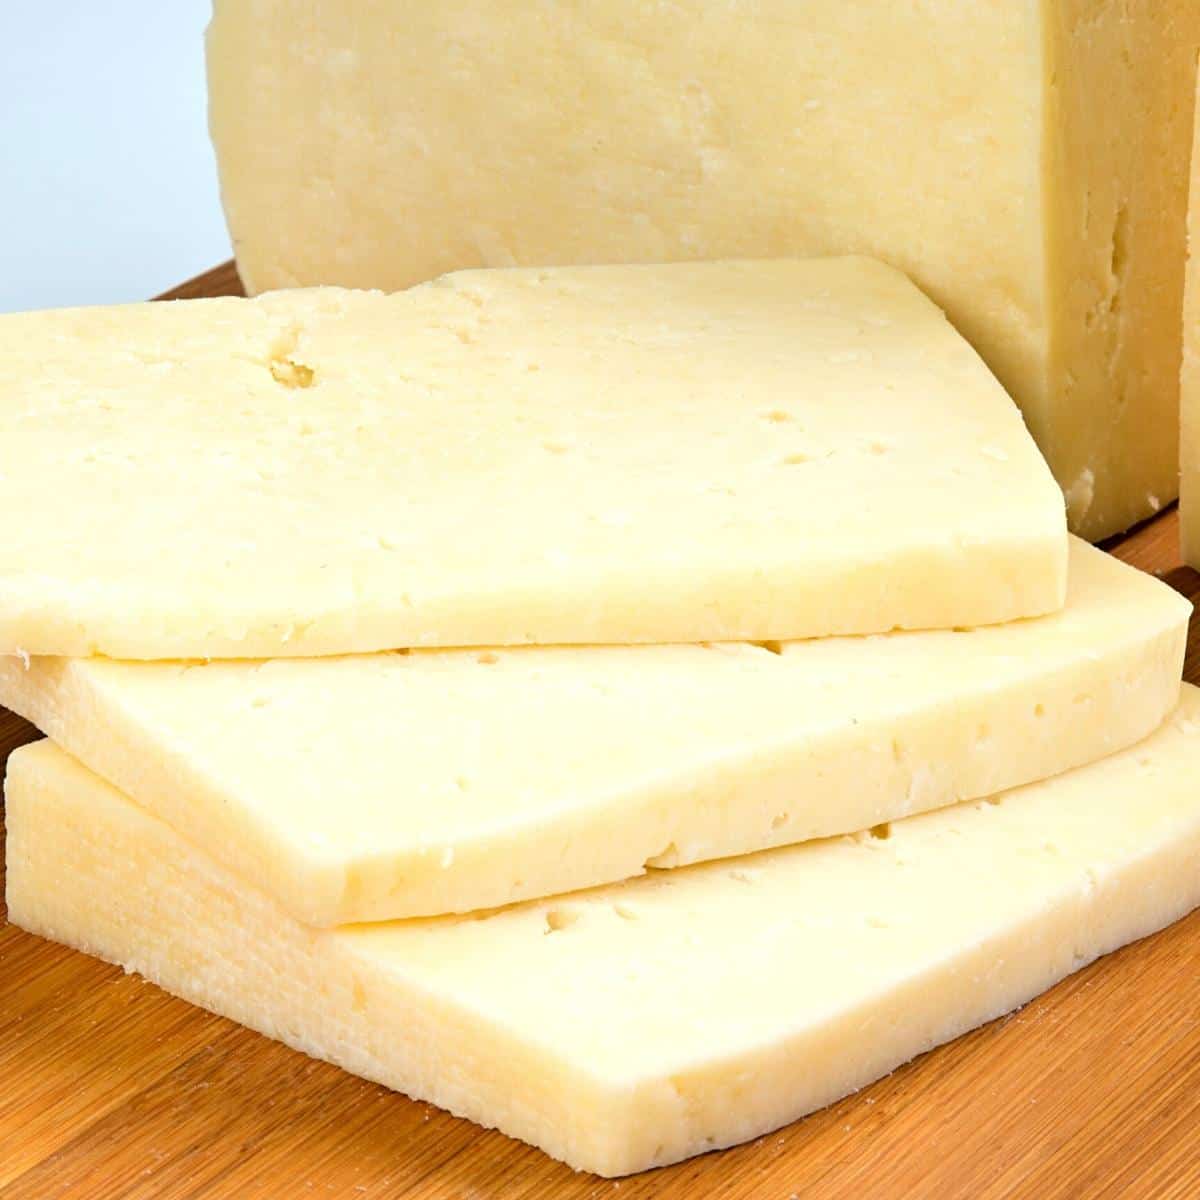 Slices of block cheese for freezing.